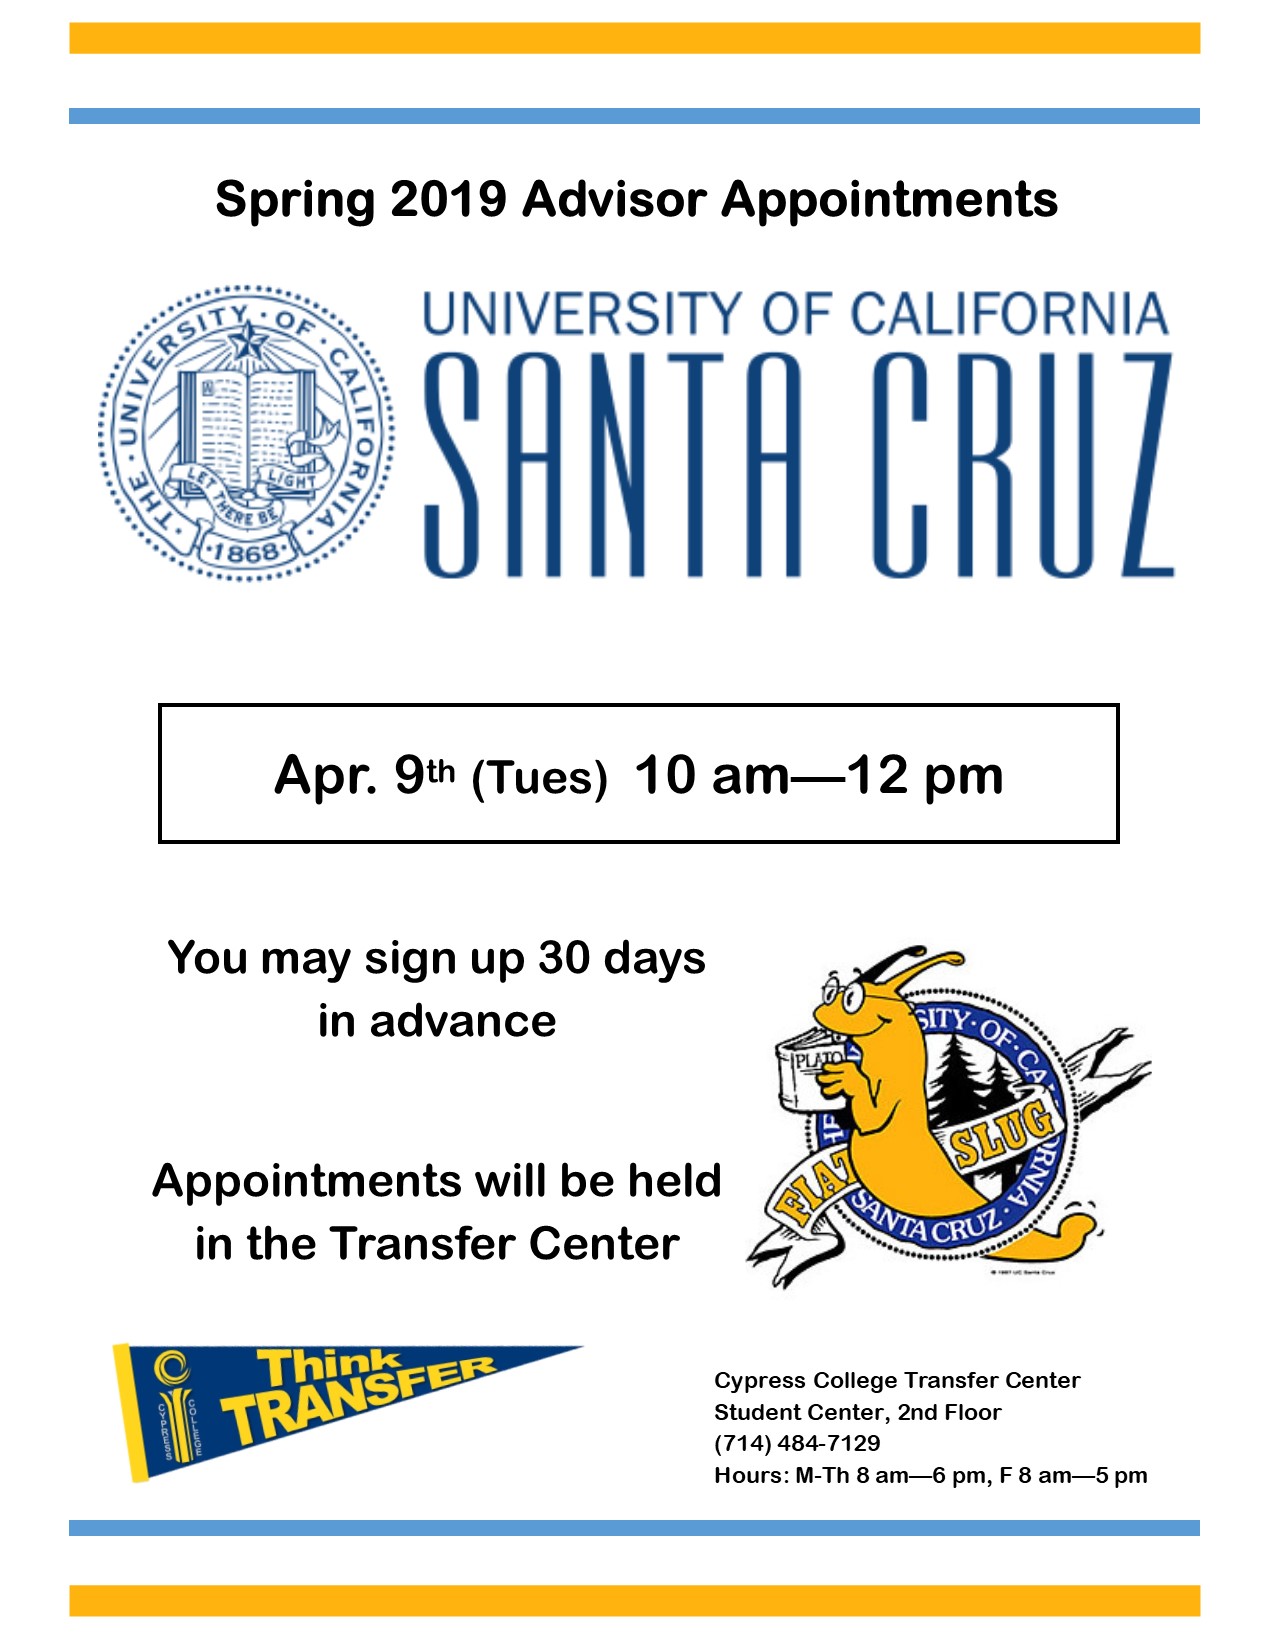 Spring 2019 Advisor Appointments flyer